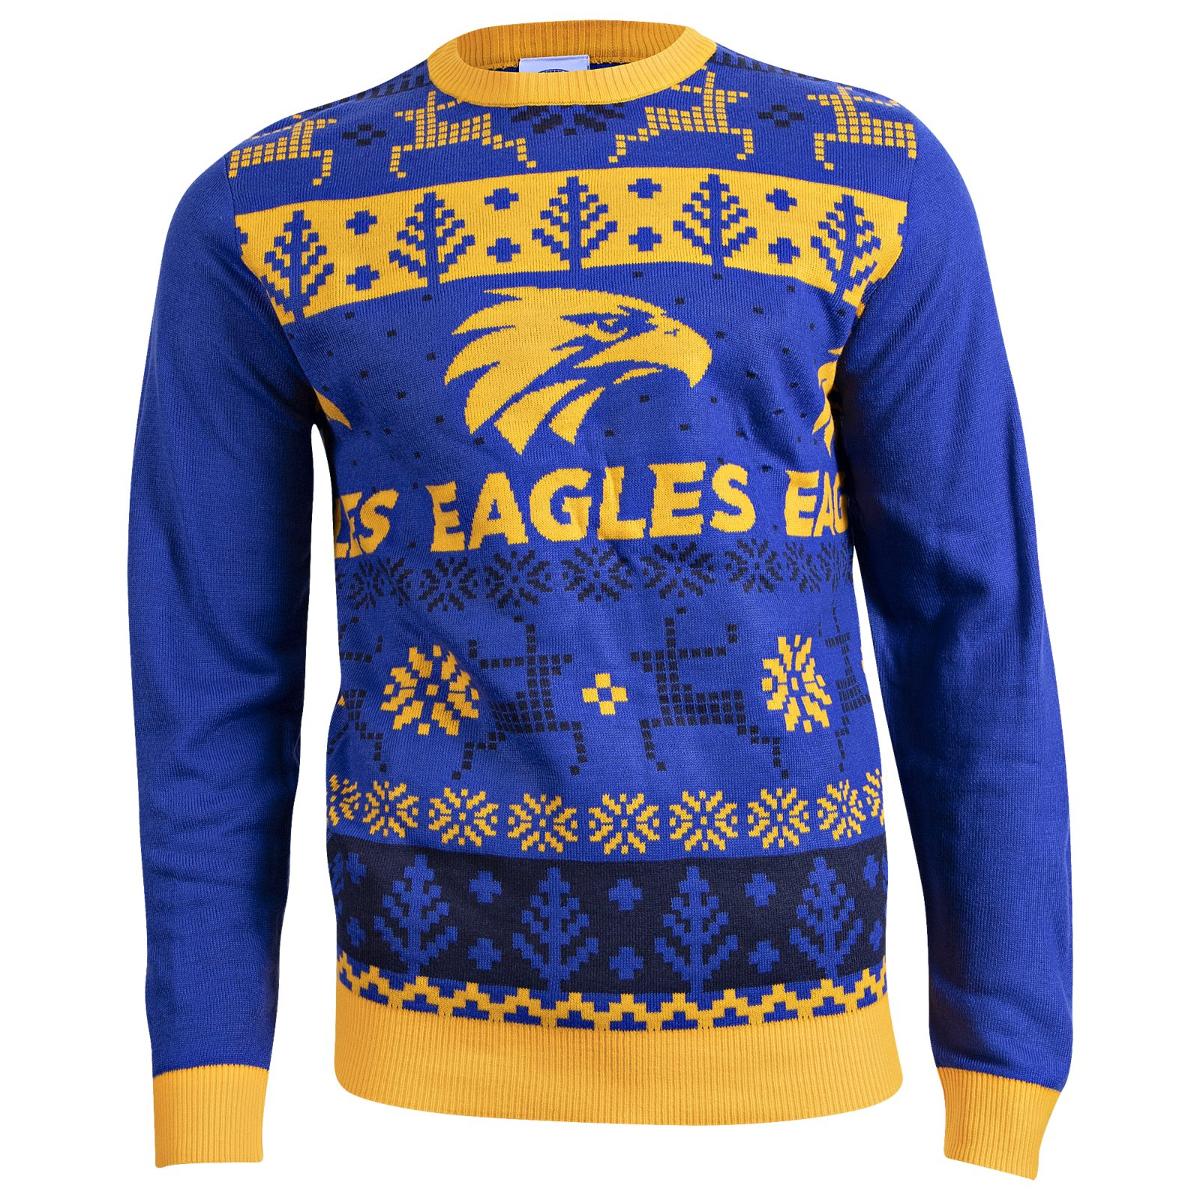 Western Bulldogs Plus Size Ugly Christmas Sweater